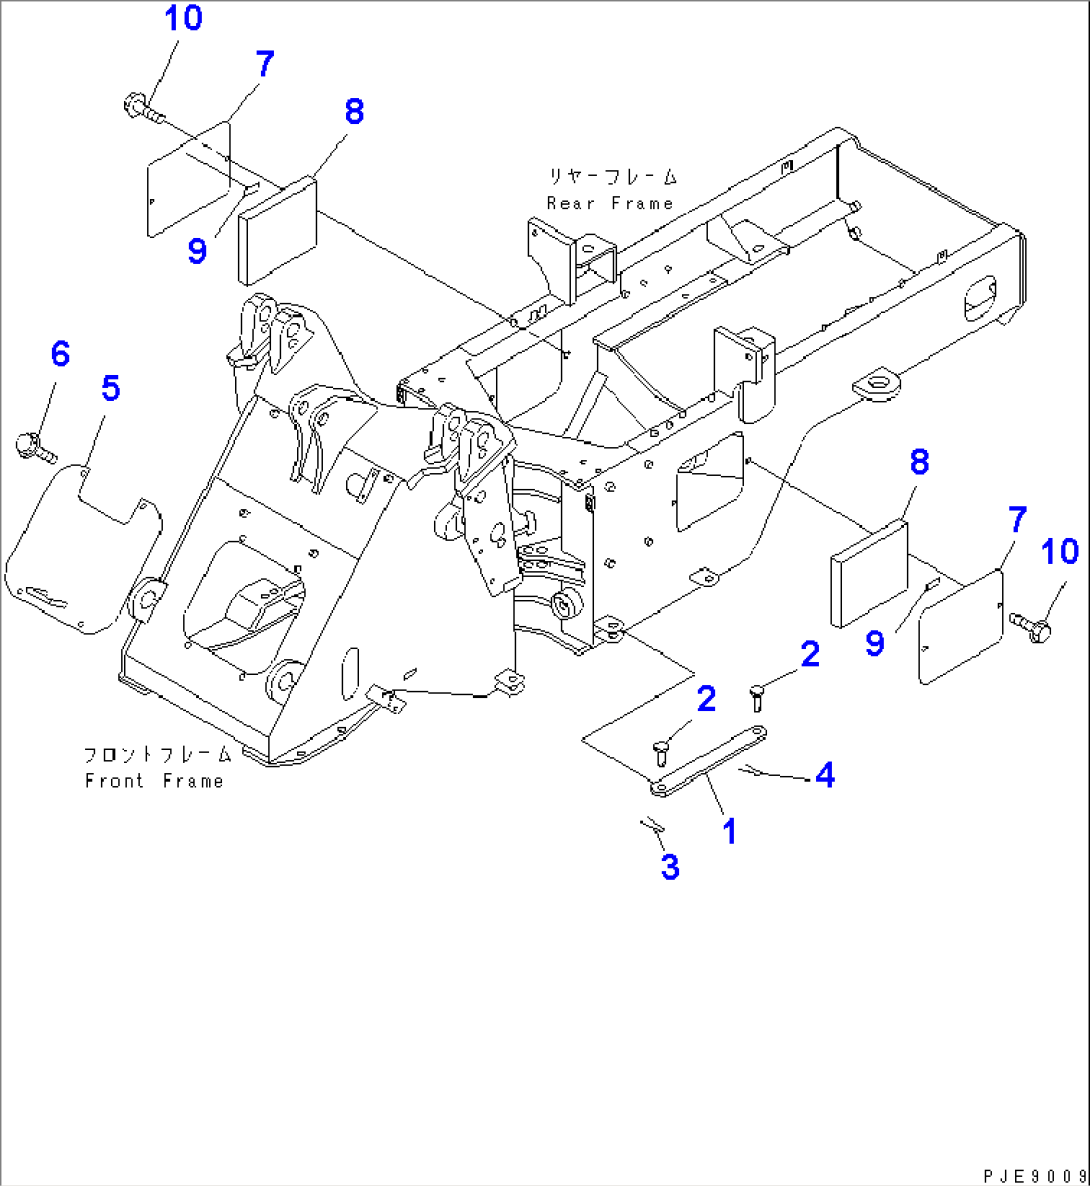 BAR LOCK AND COVER (WITH 4-SPOOL PIPING)